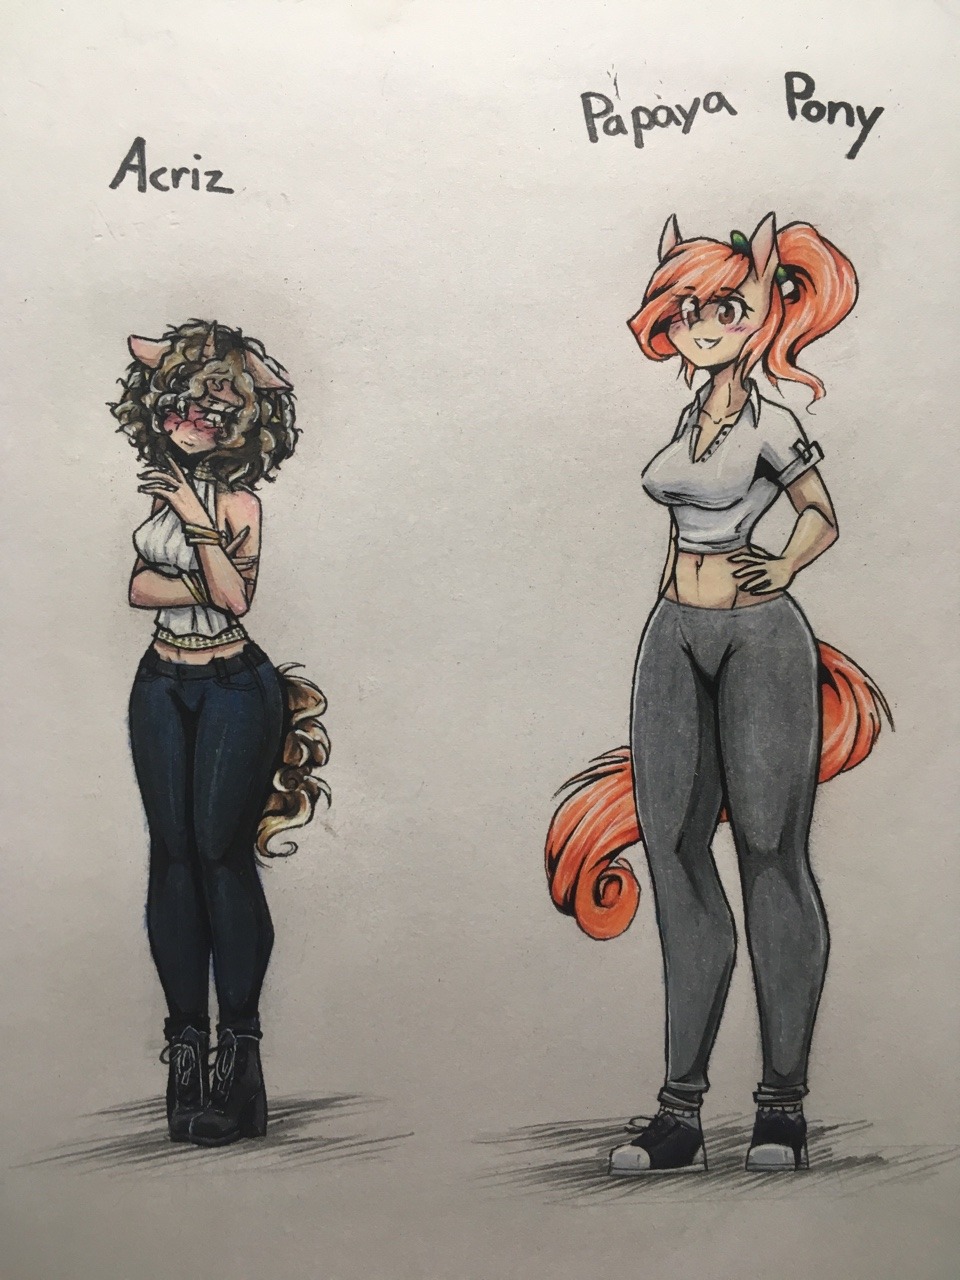 acriz-caazi: Alright, done! Papaya pone’s face is cute, but Charlotte and Erica’s